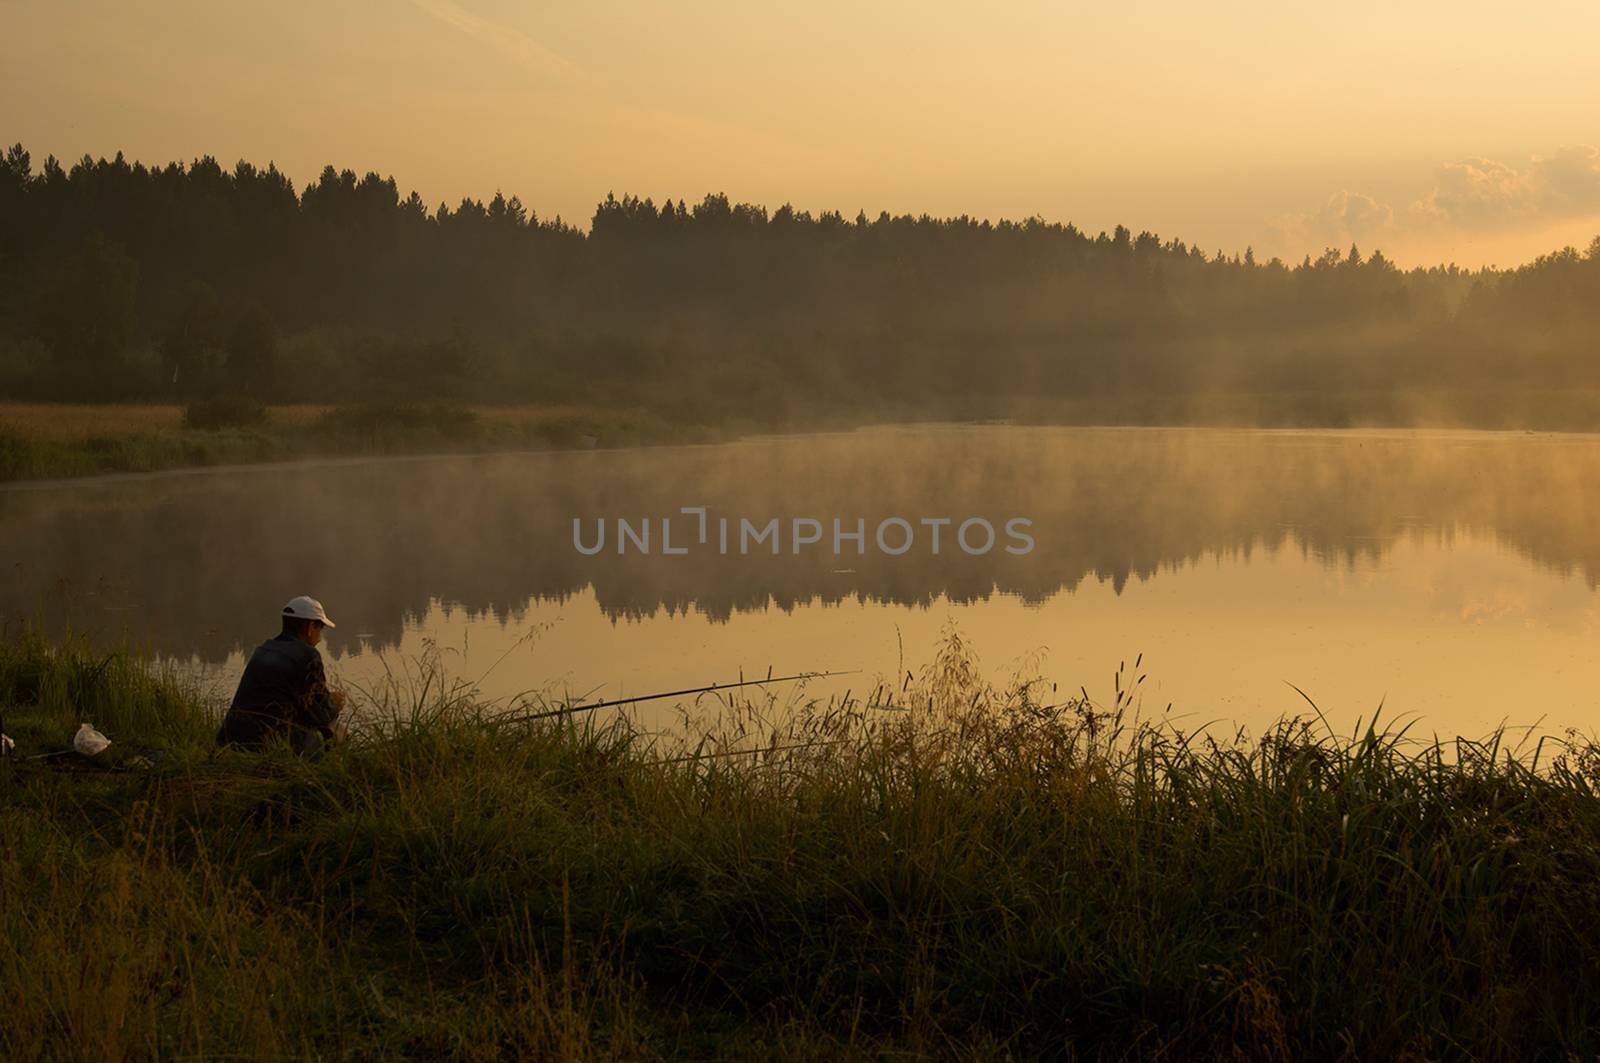 A fisherman at sunset on the pond catches fish.